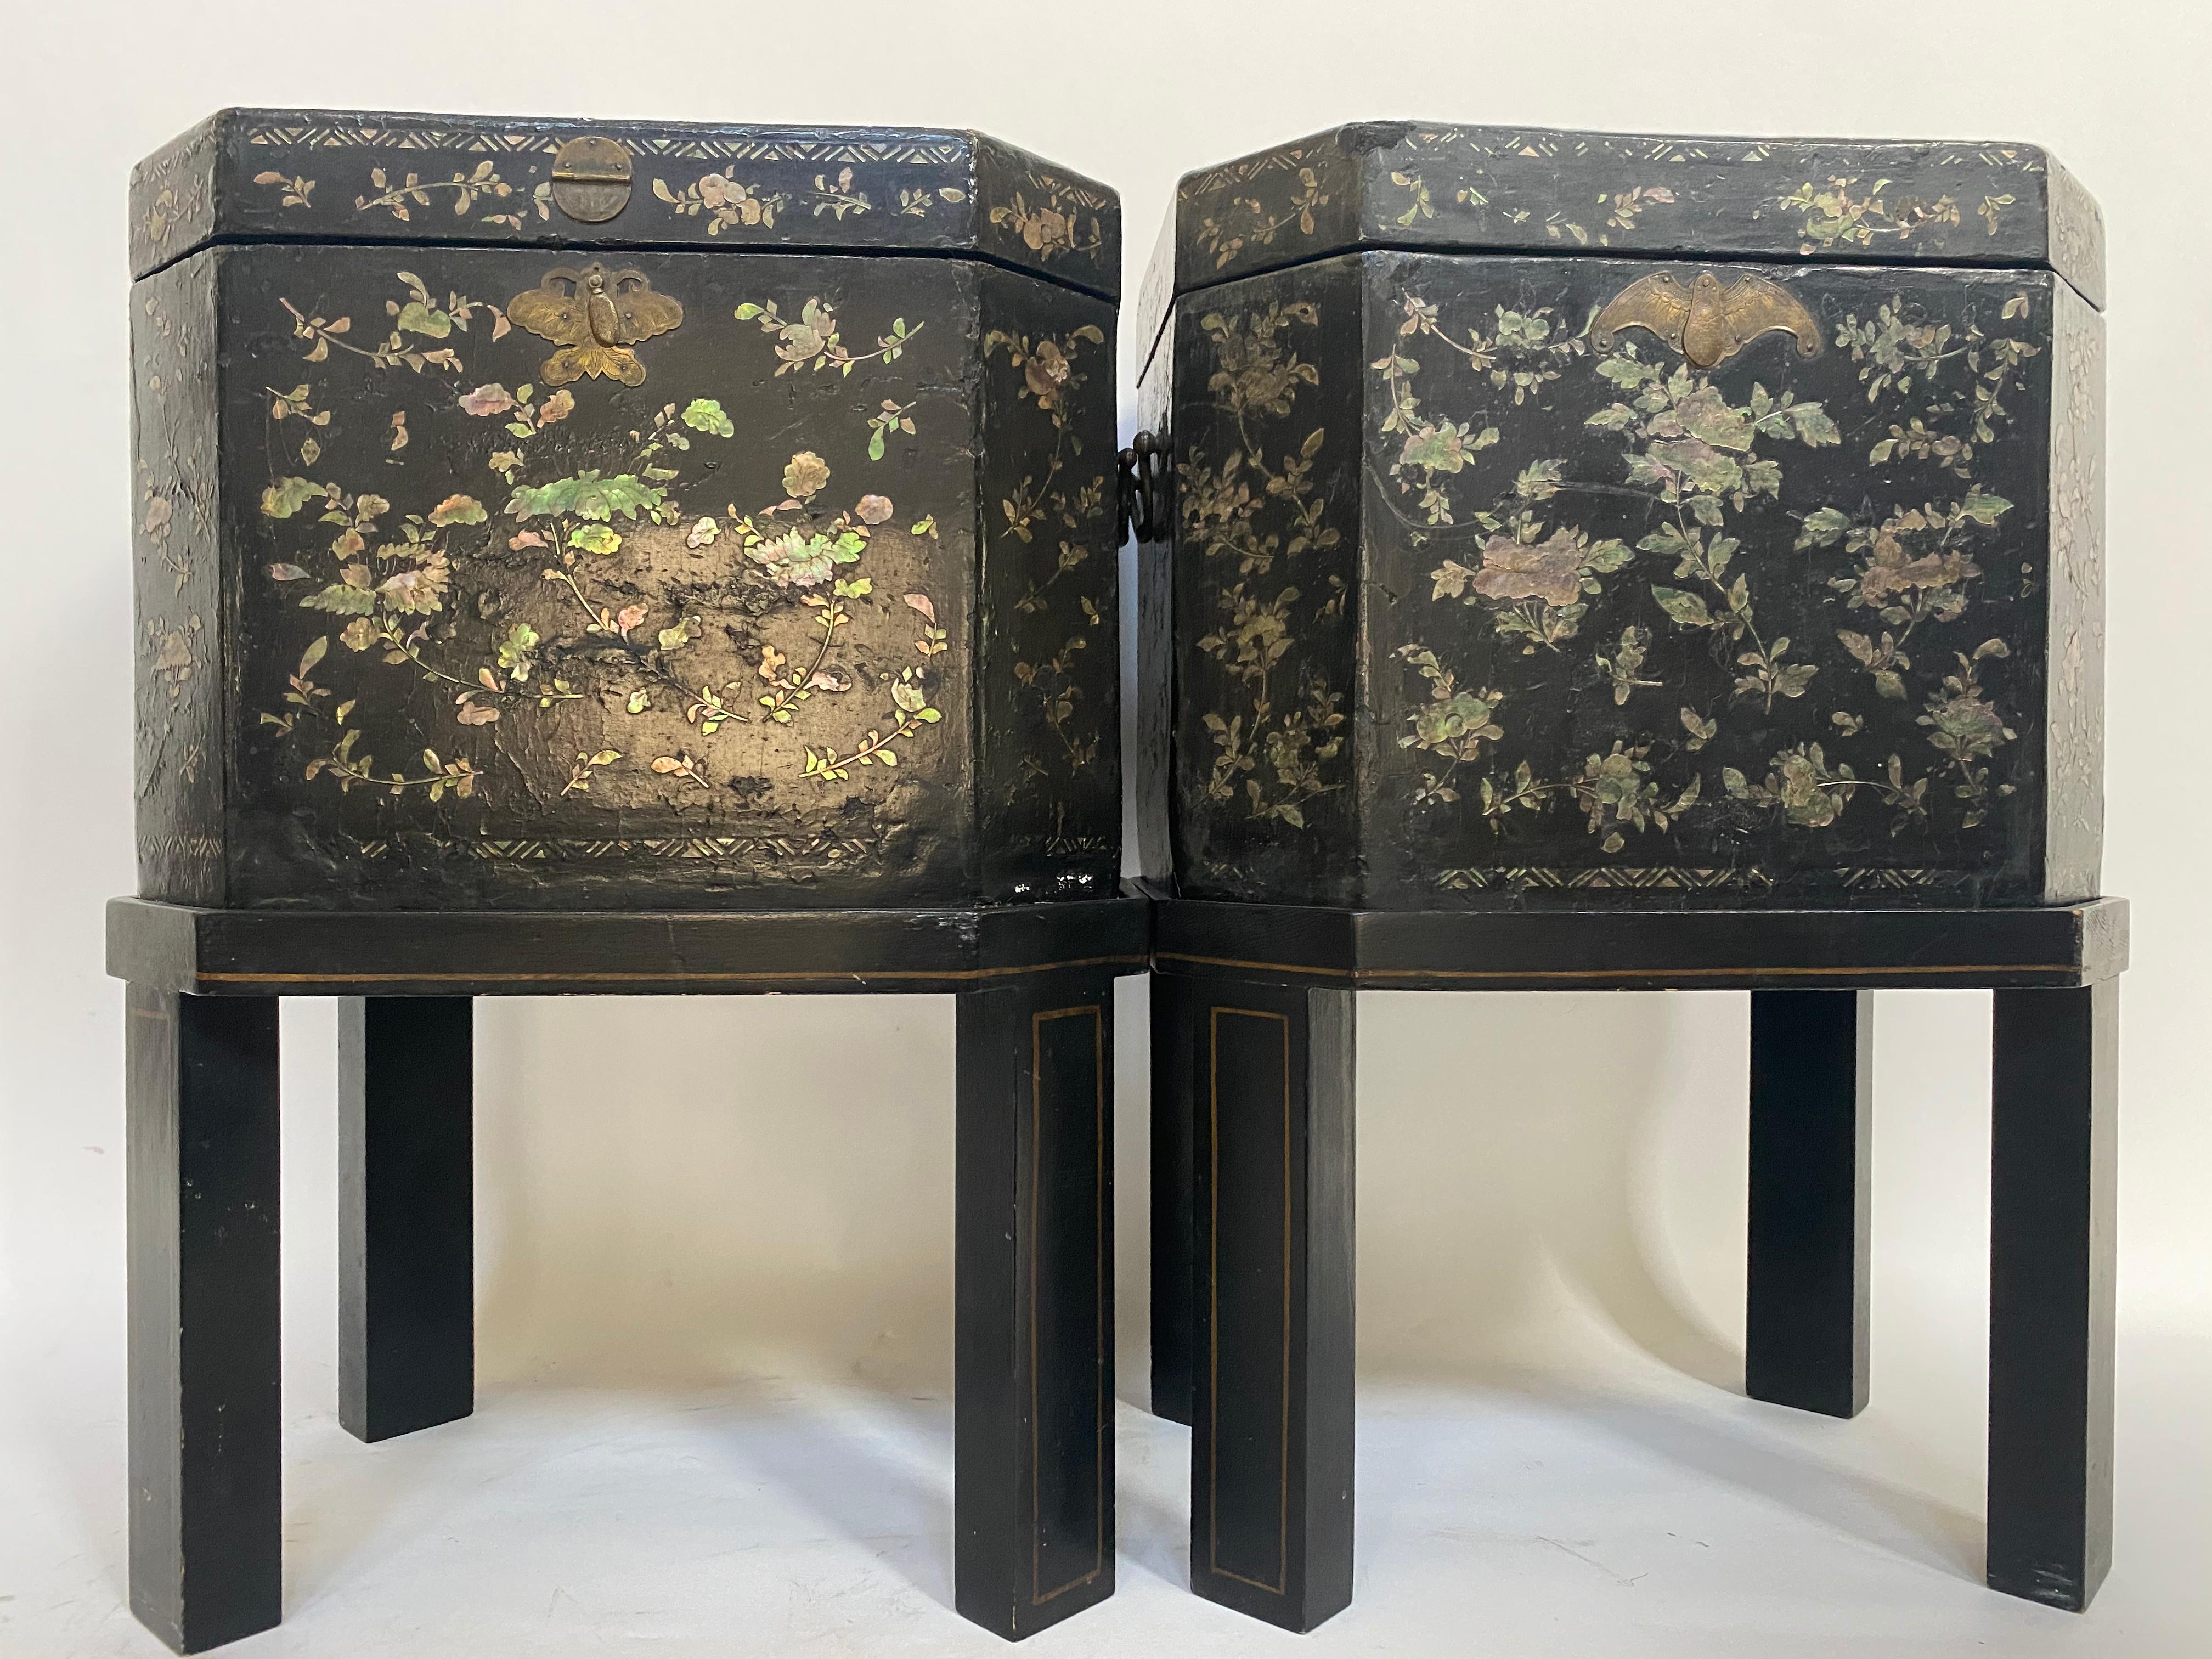 19th Century Unique Pair of Shell Inlaid Black Lacquer Big Chinese Tea Caddies For Sale 3